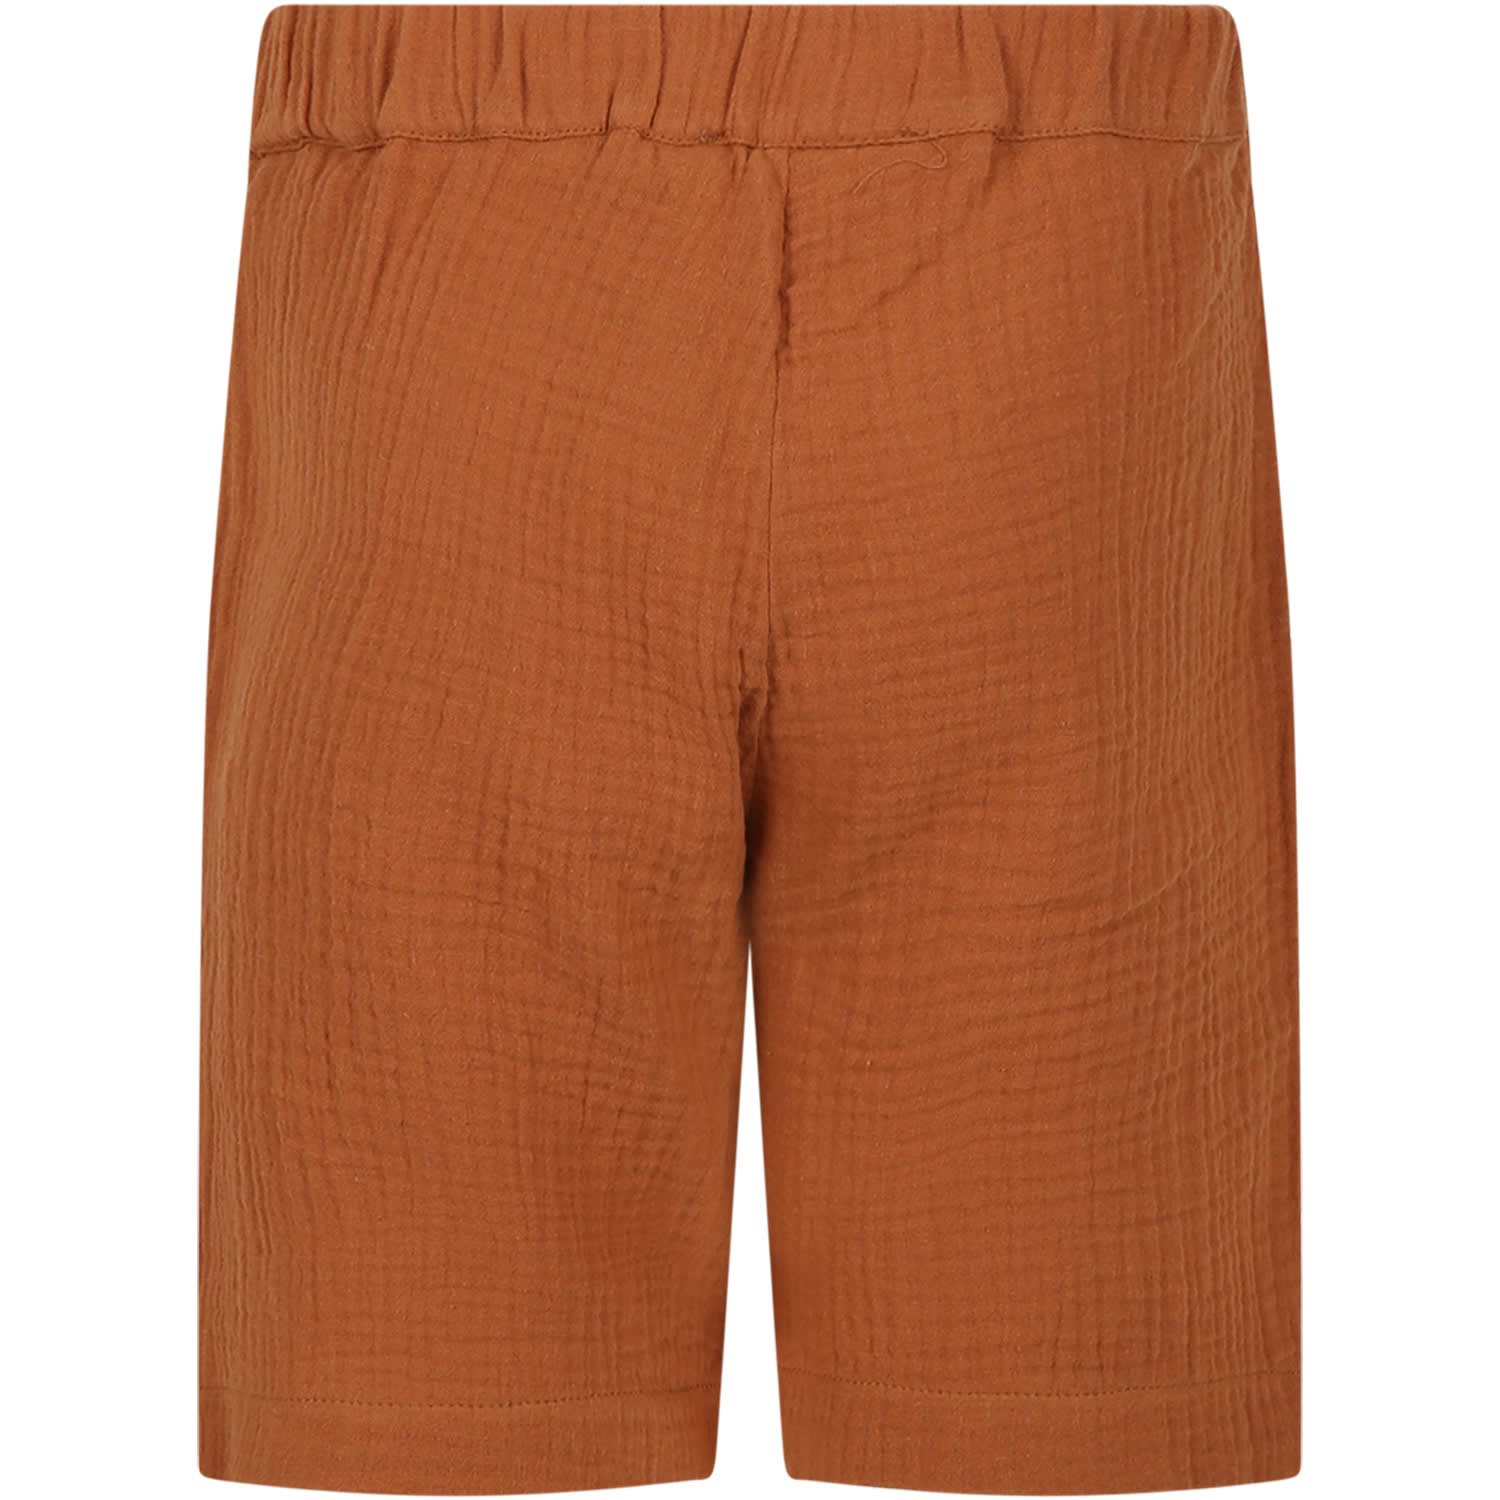 Shop Le Petit Coco Brown Shorts For Boy With Print And I Love Doodle Writing